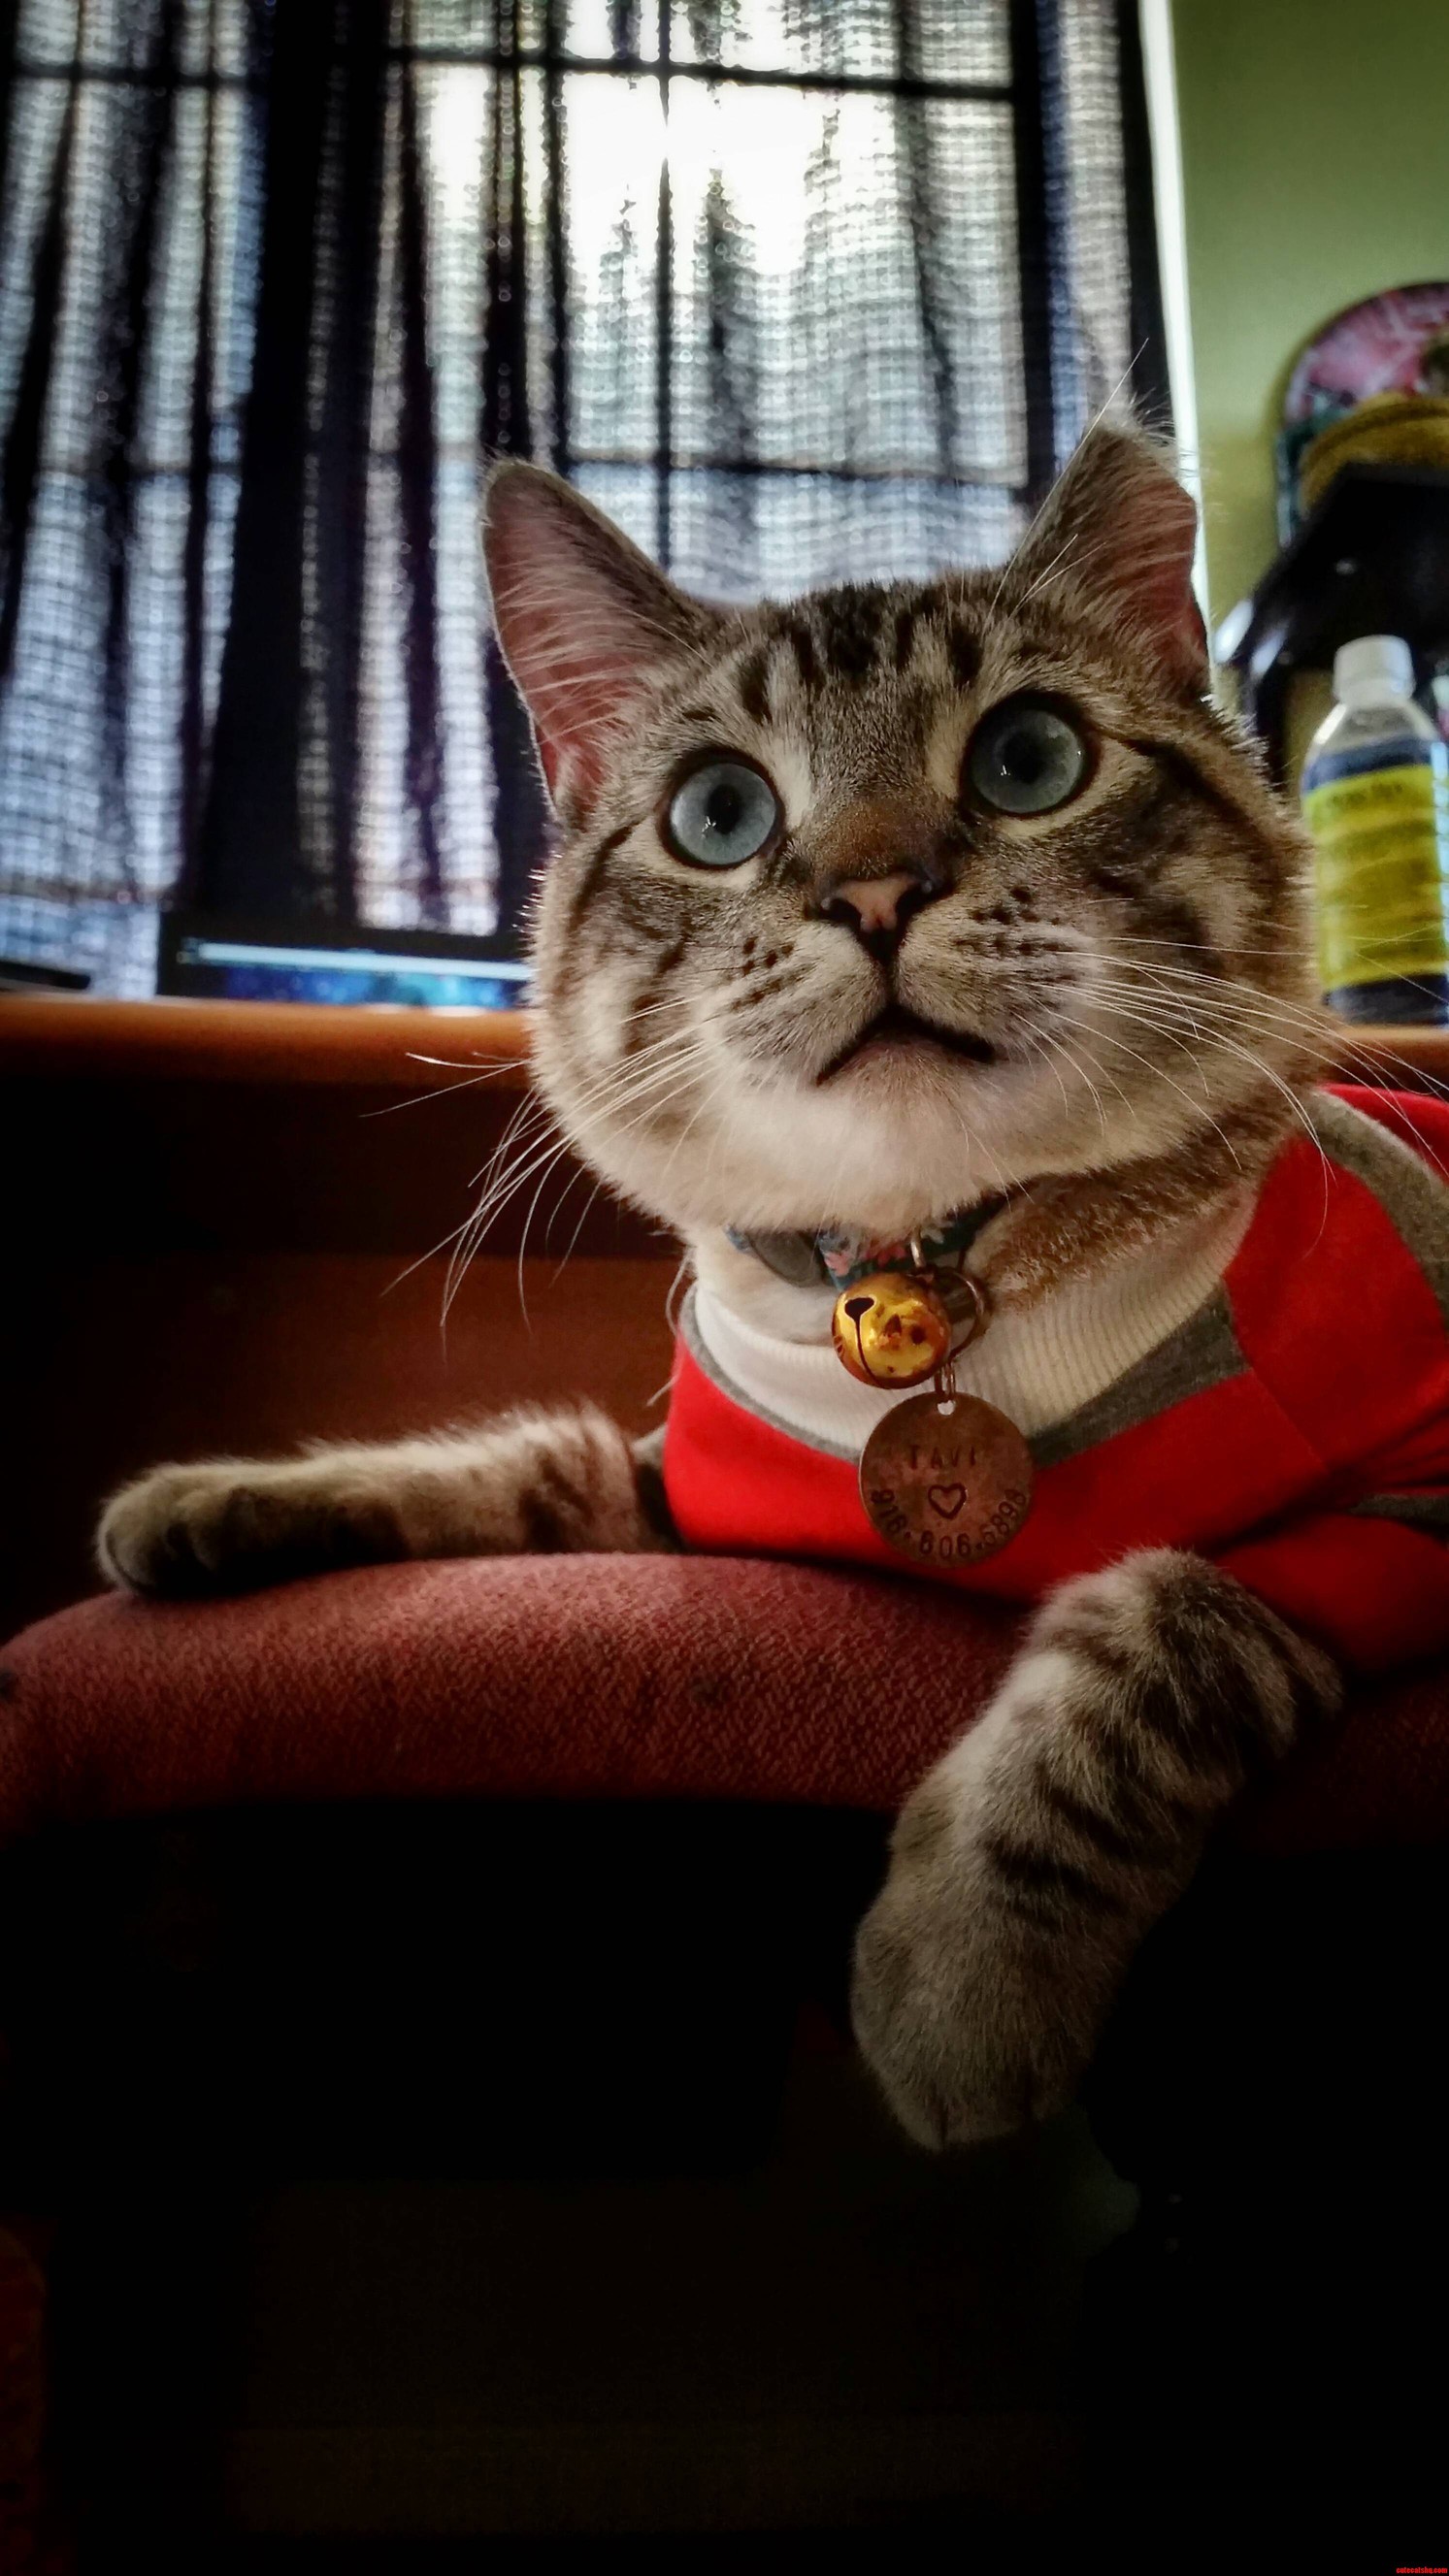 My cat actually really enjoys wearing his first shirt. Here he is looking as handsome as ever.